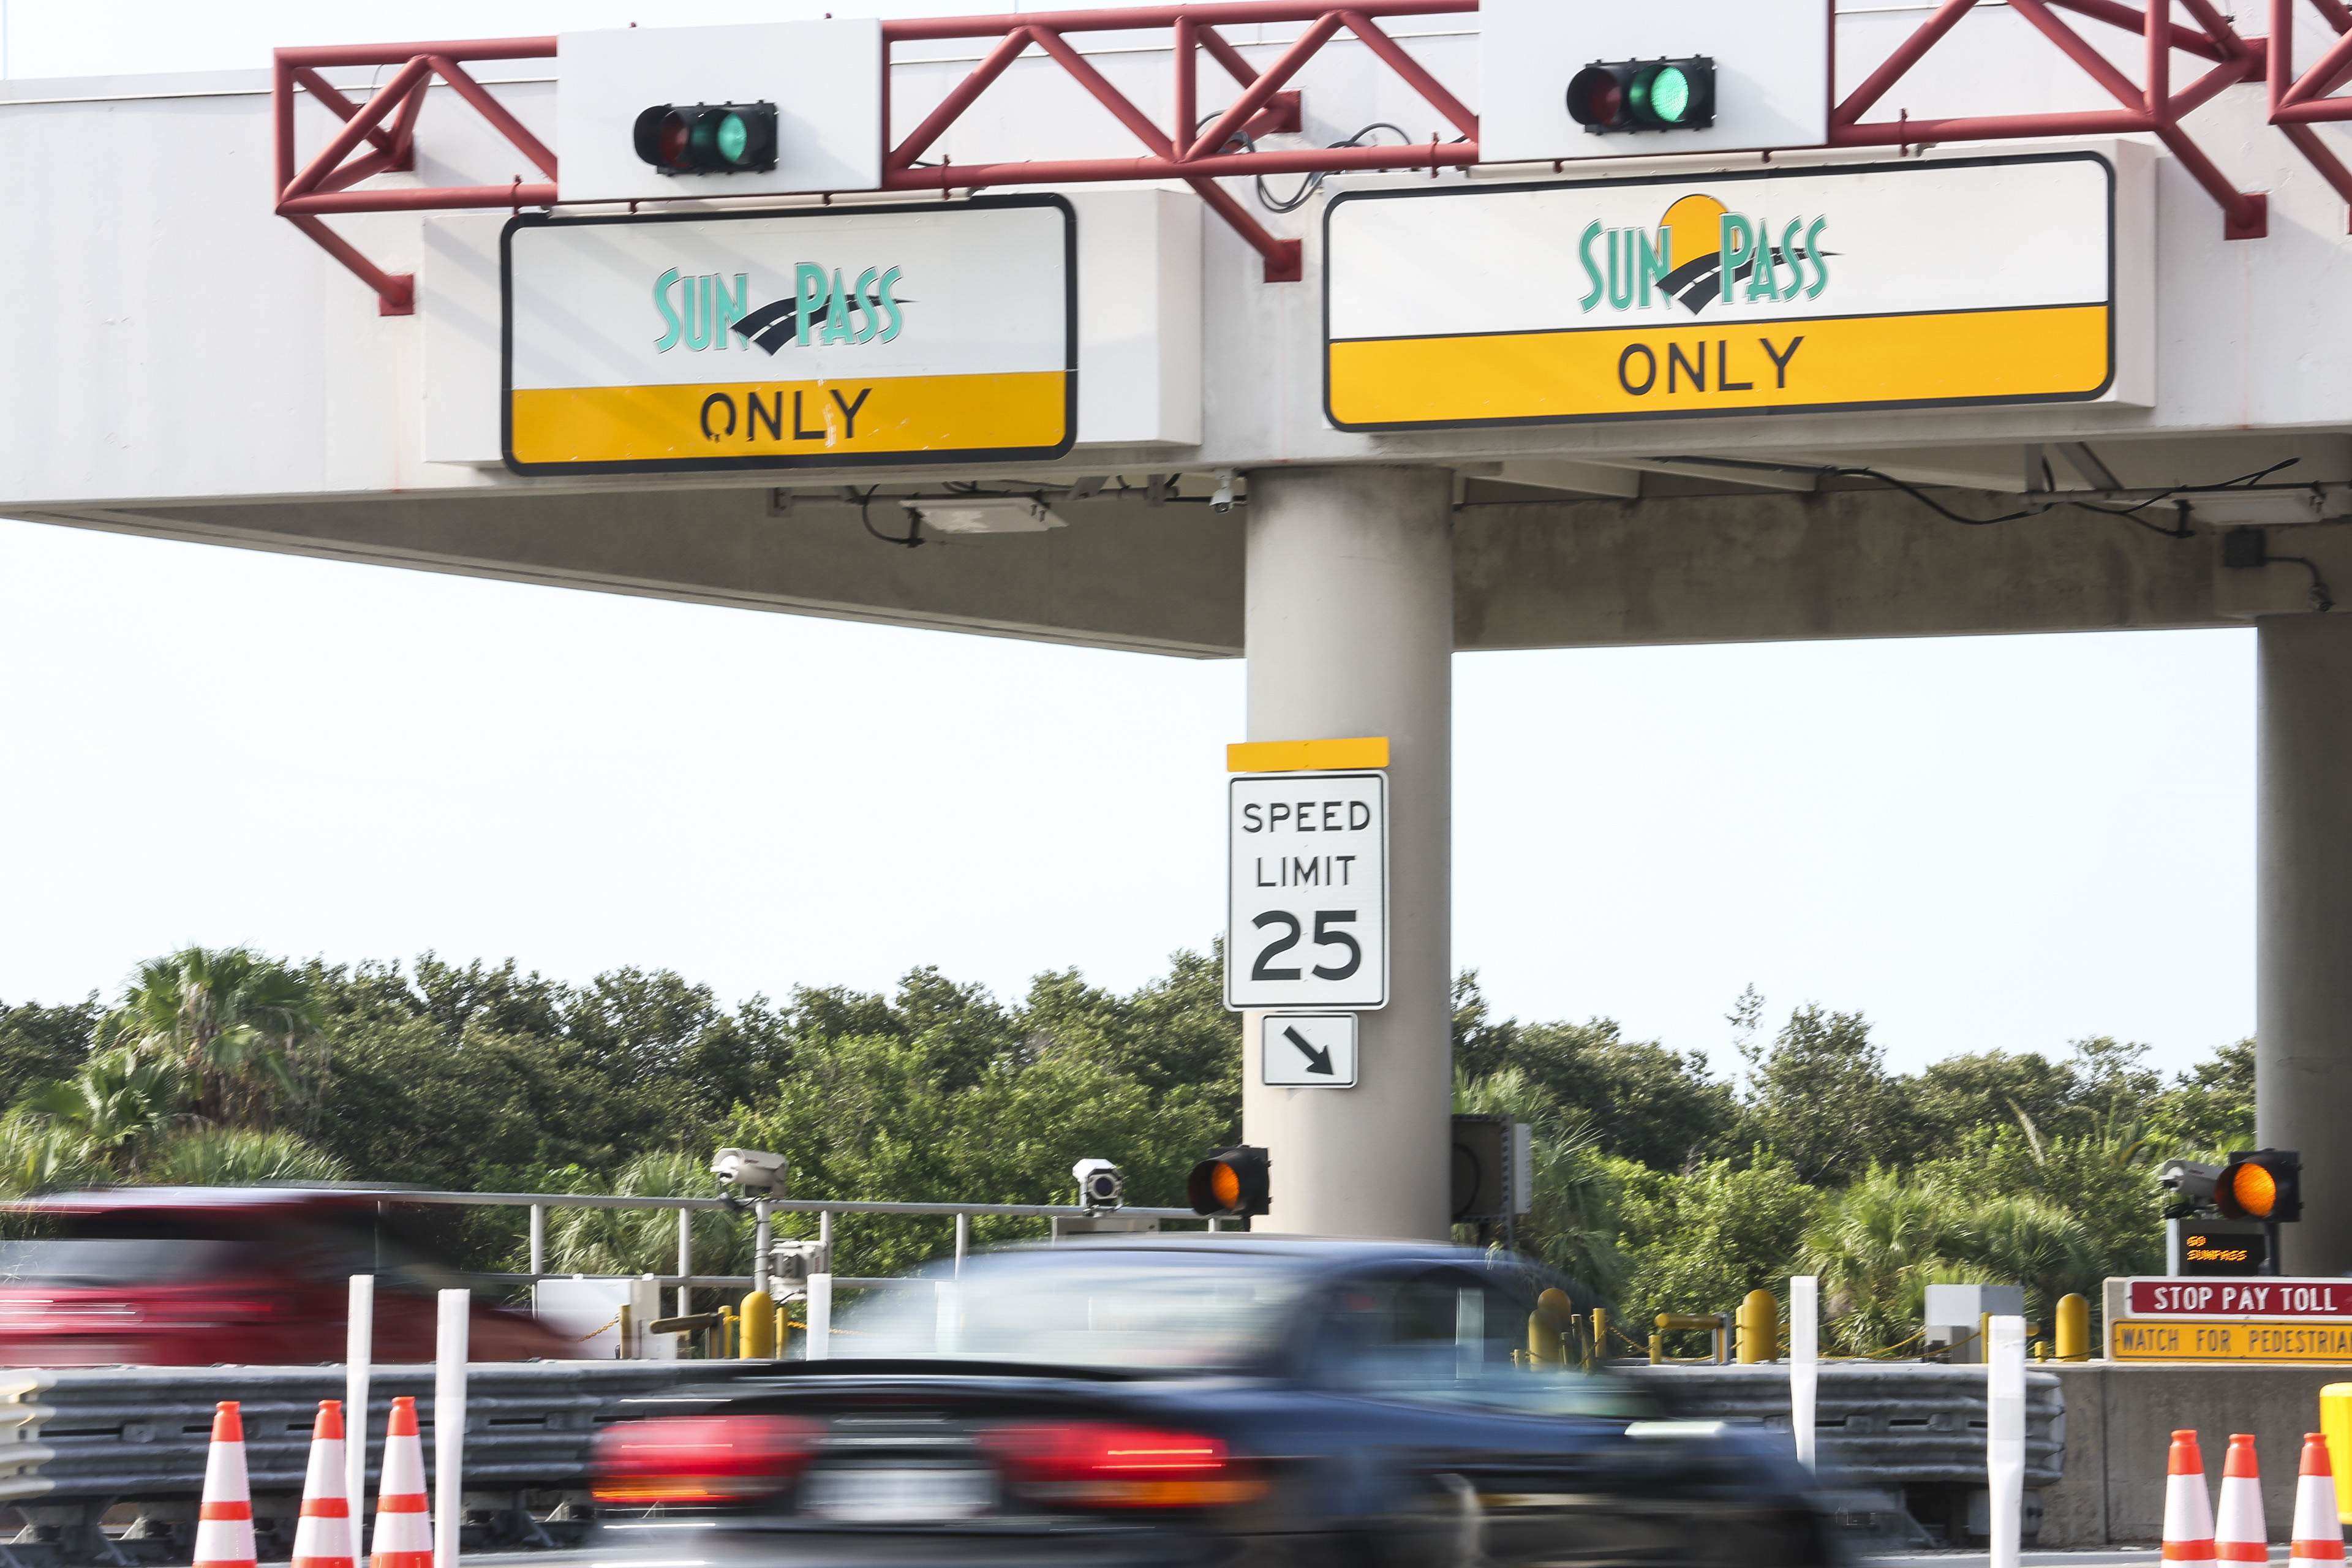 What You Need To Know About Florida’s New Toll Law